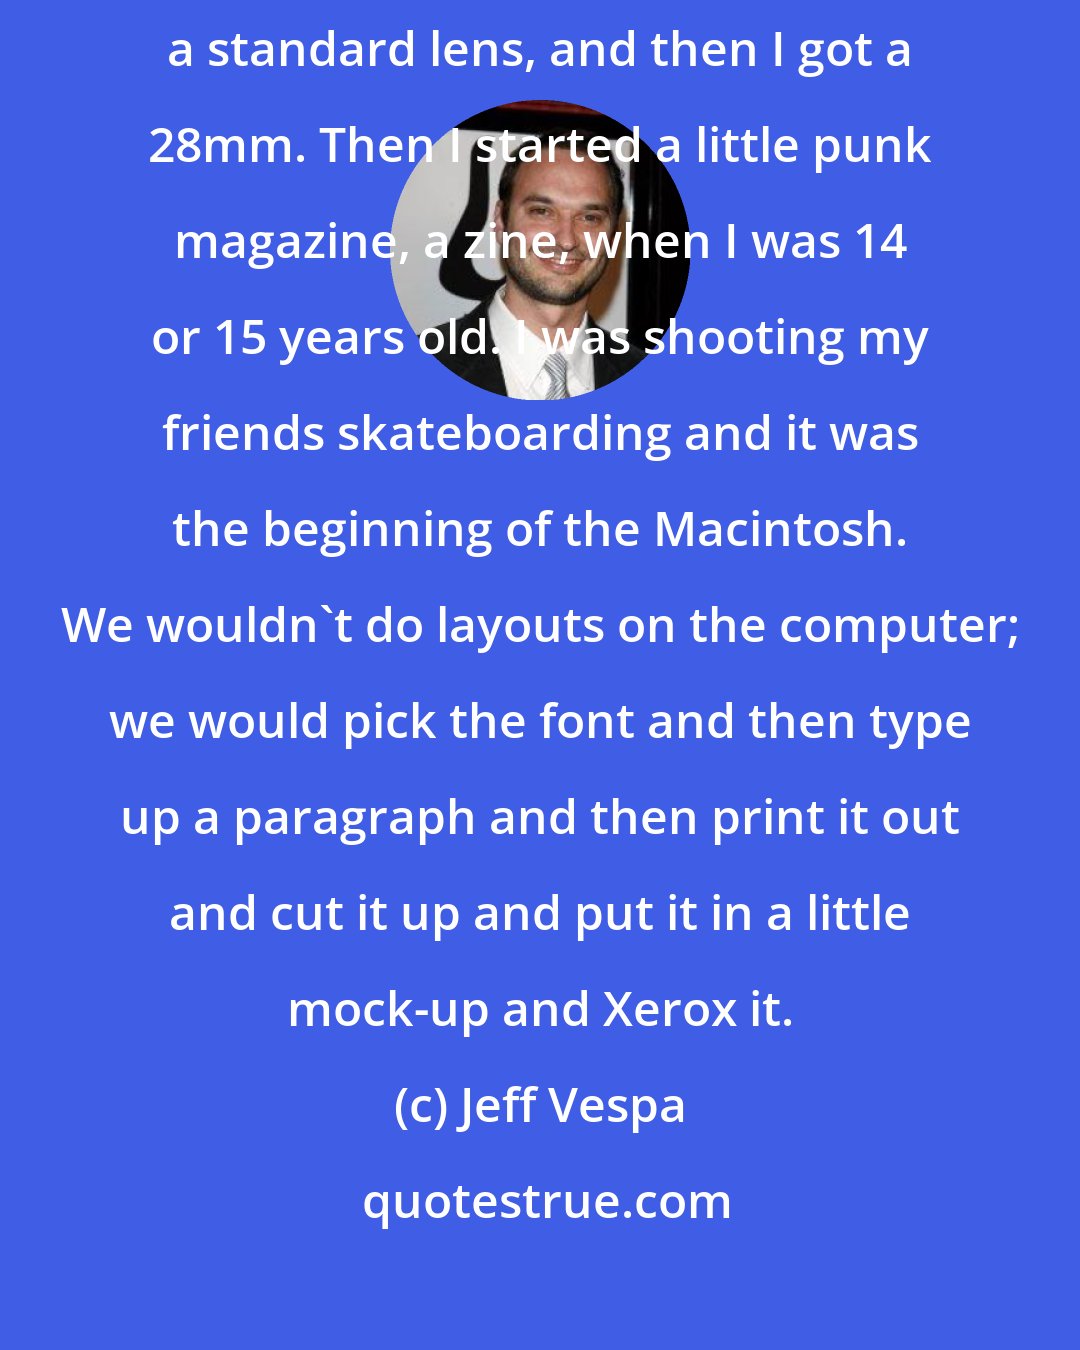 Jeff Vespa: The Canon AE1 - a fully manual camera. [My mother] had a 50mm, which is a standard lens, and then I got a 28mm. Then I started a little punk magazine, a zine, when I was 14 or 15 years old. I was shooting my friends skateboarding and it was the beginning of the Macintosh. We wouldn't do layouts on the computer; we would pick the font and then type up a paragraph and then print it out and cut it up and put it in a little mock-up and Xerox it.